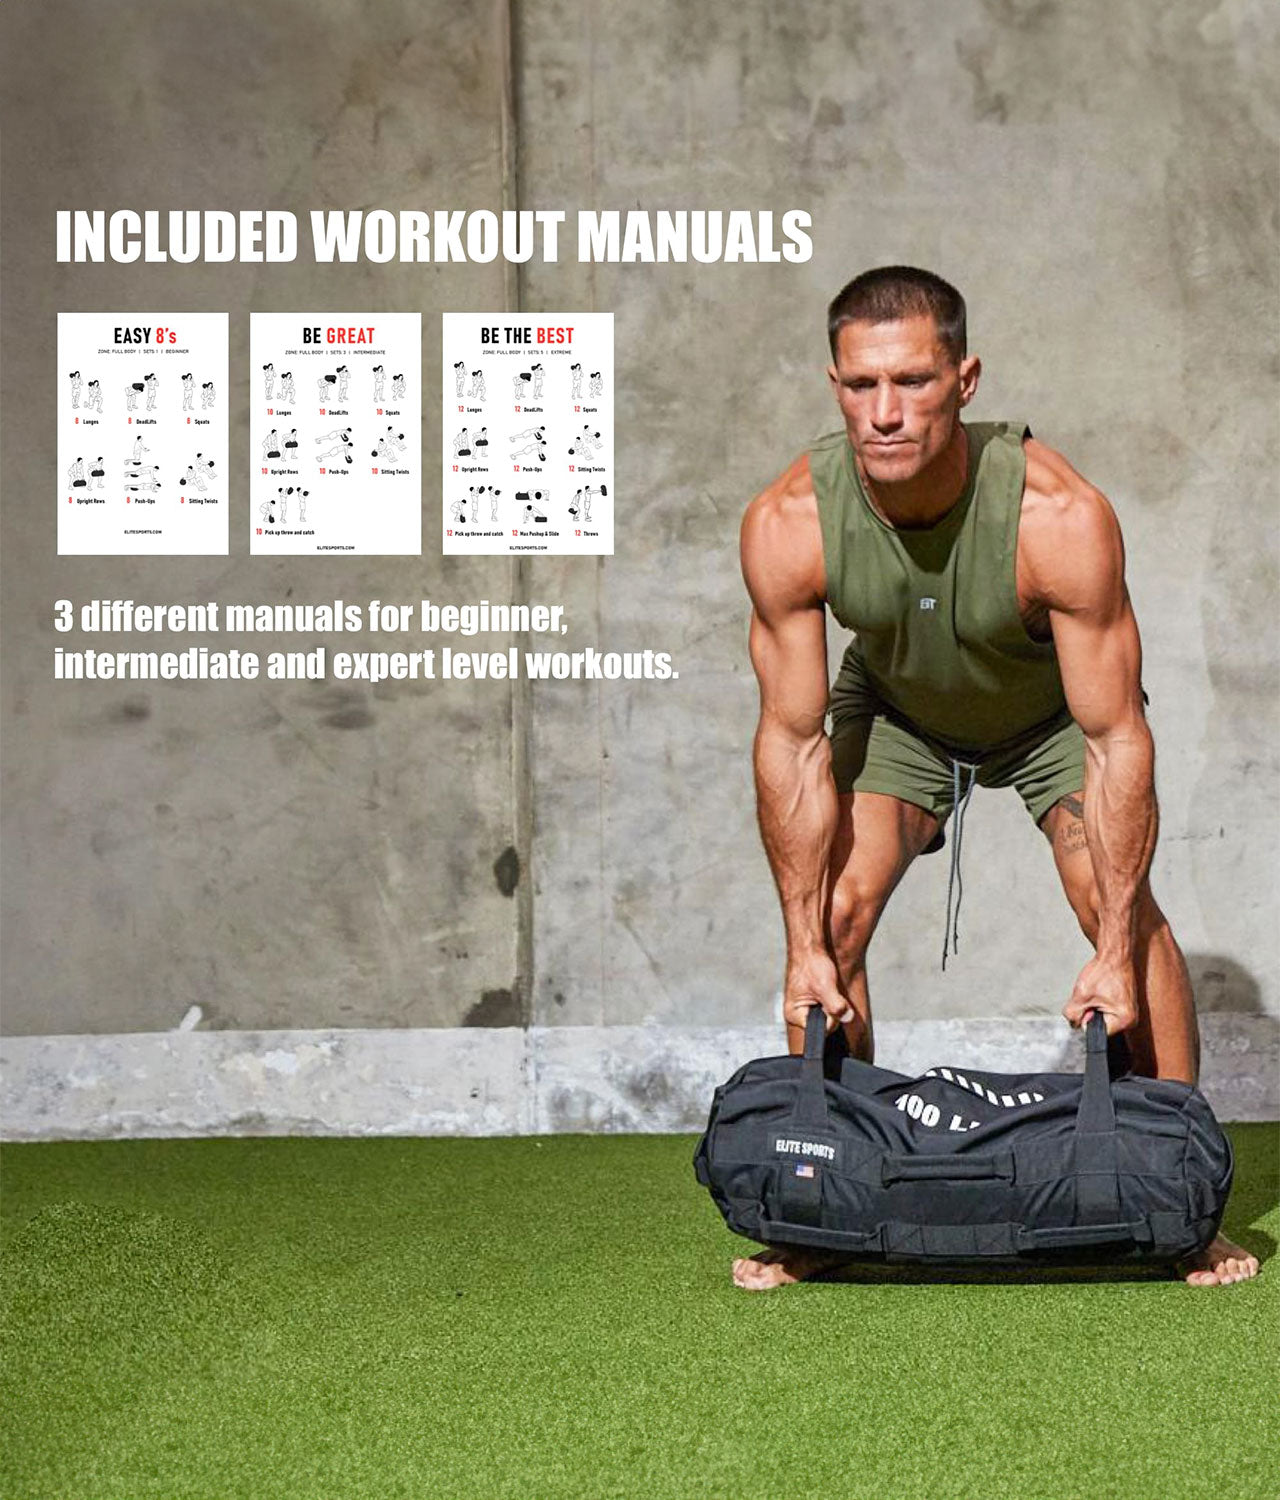 Elite Sports Core Duffel Workout Sandbag 25 lbs Included Workout Manuals